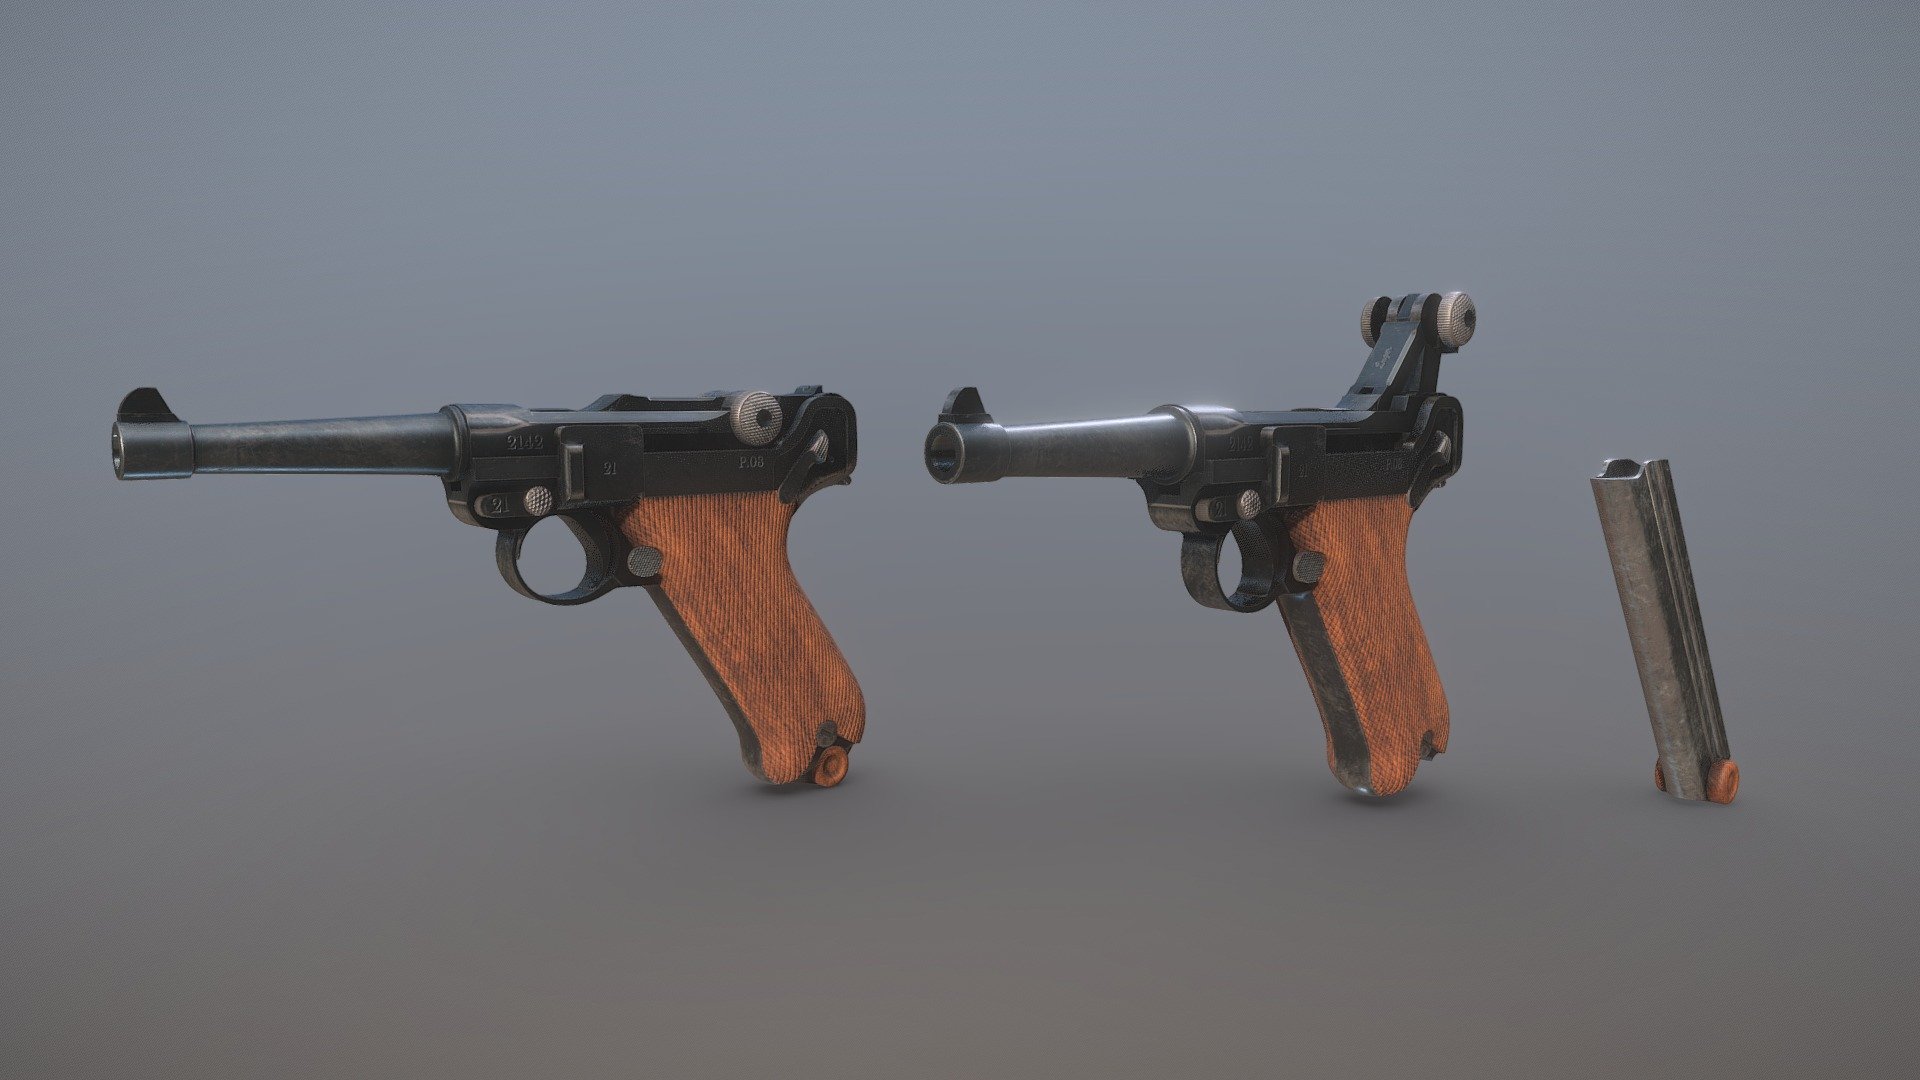 Been trying to push myself to create more complex hard surface models, so I spent the last few days working on this, a P08 Luger. An absolute classic of the World Wars, and a revolutionary design in firearms history. 

Not 100% accurate or specific to any single Luger variant, I picked little pieces of aesethics from different models that I liked, but most of the details are there, functional controls are there, and the important silhouettes are all there.

I did design the model with &ldquo;game ready